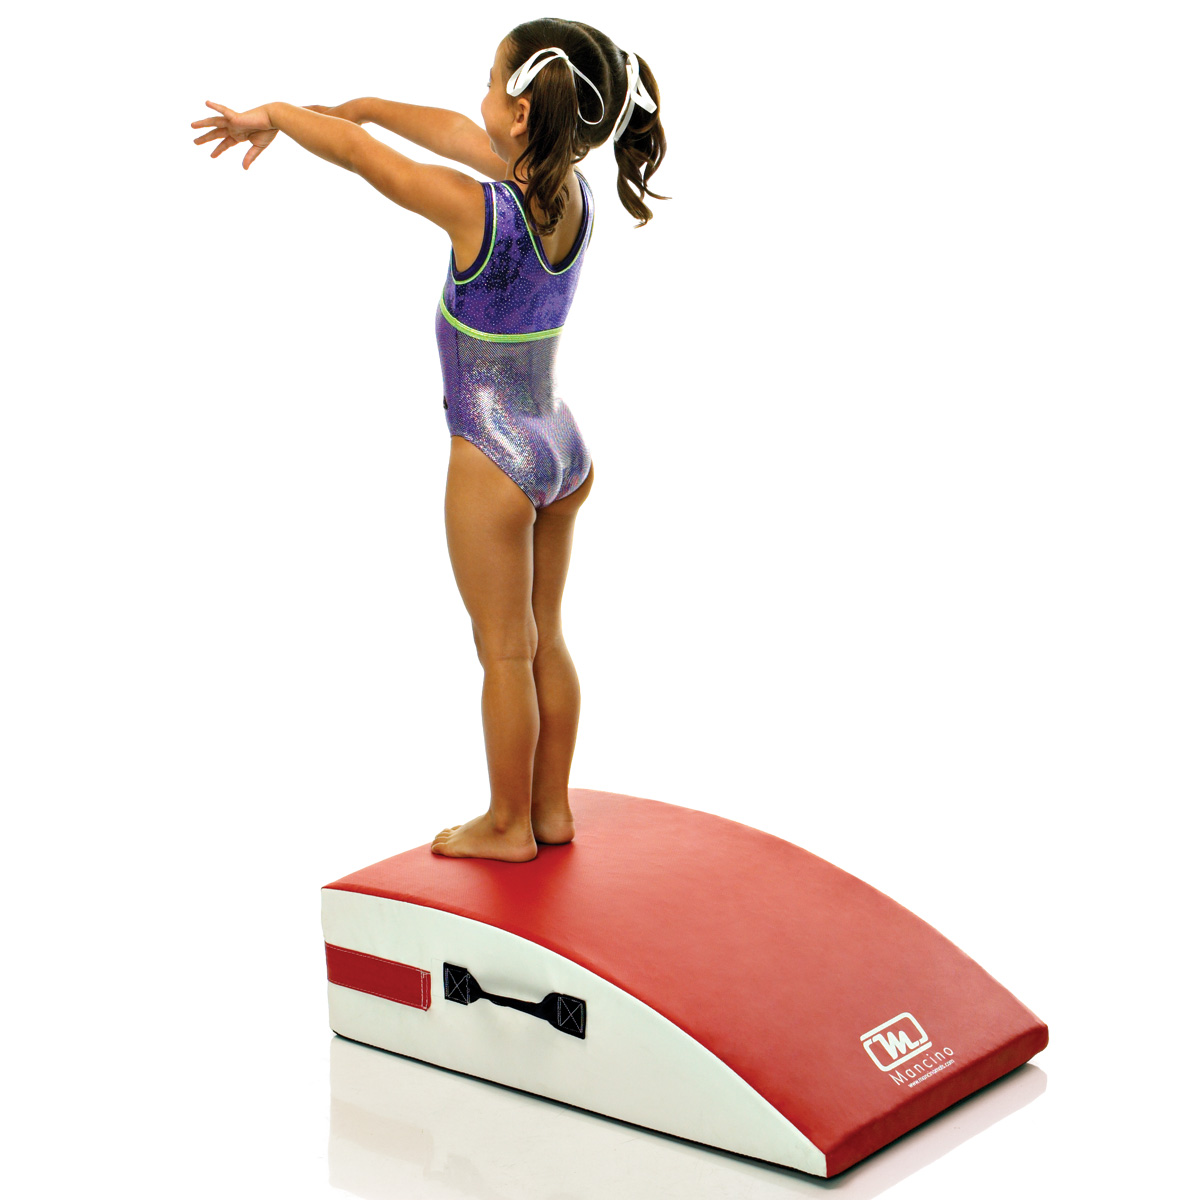 Euro style mount block with gymnast